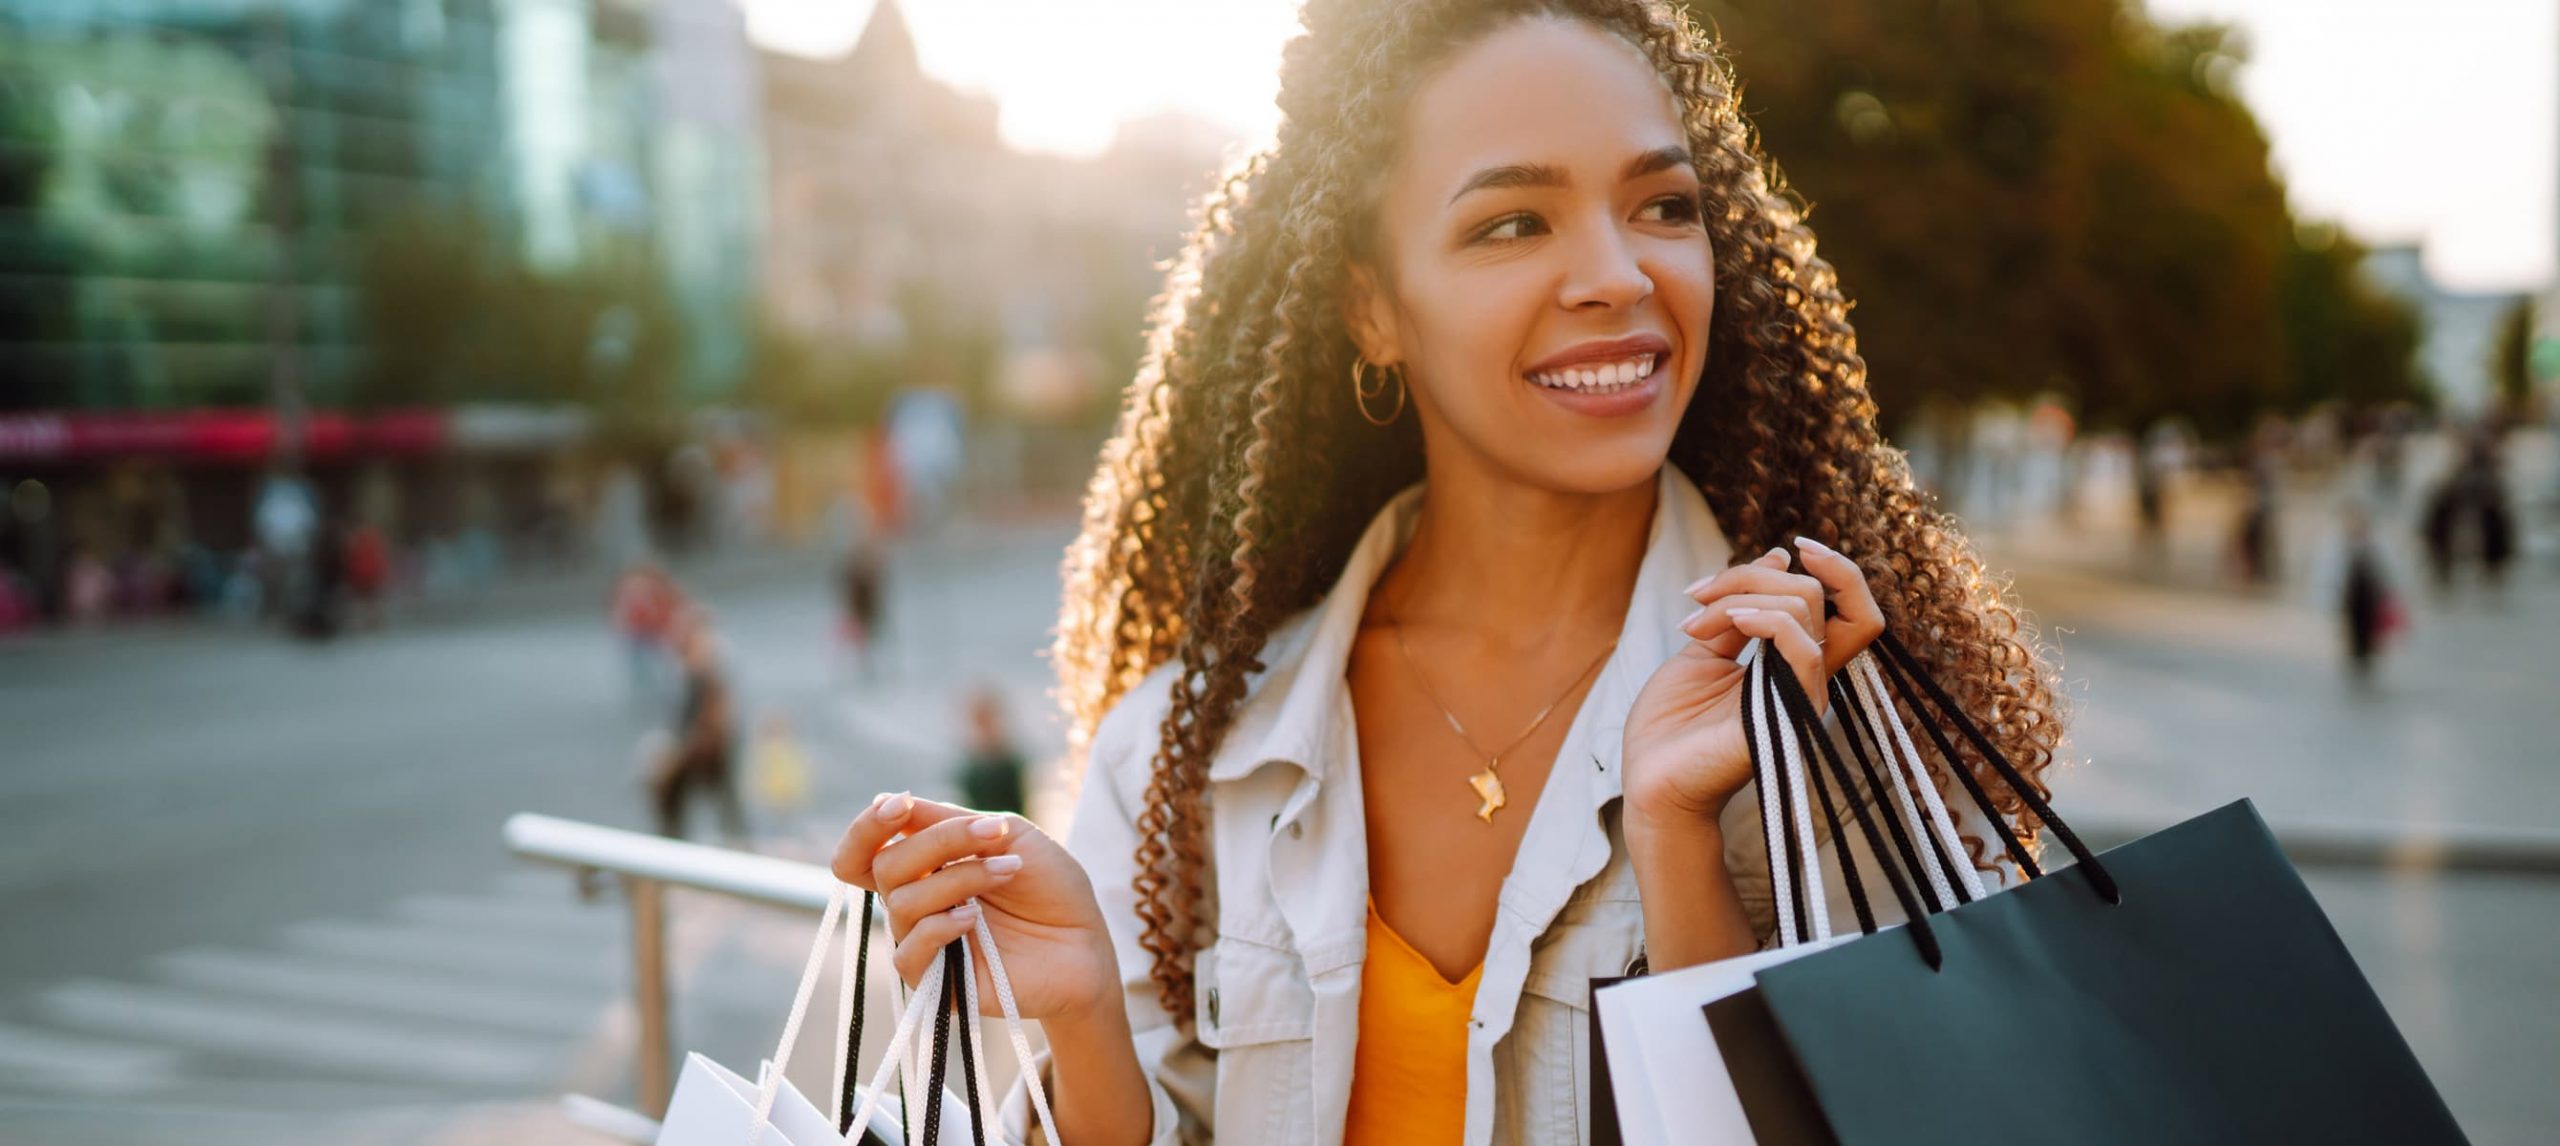 The 10 Best Destinations For Shopping In The Usa Cuddlynest Travel Blog